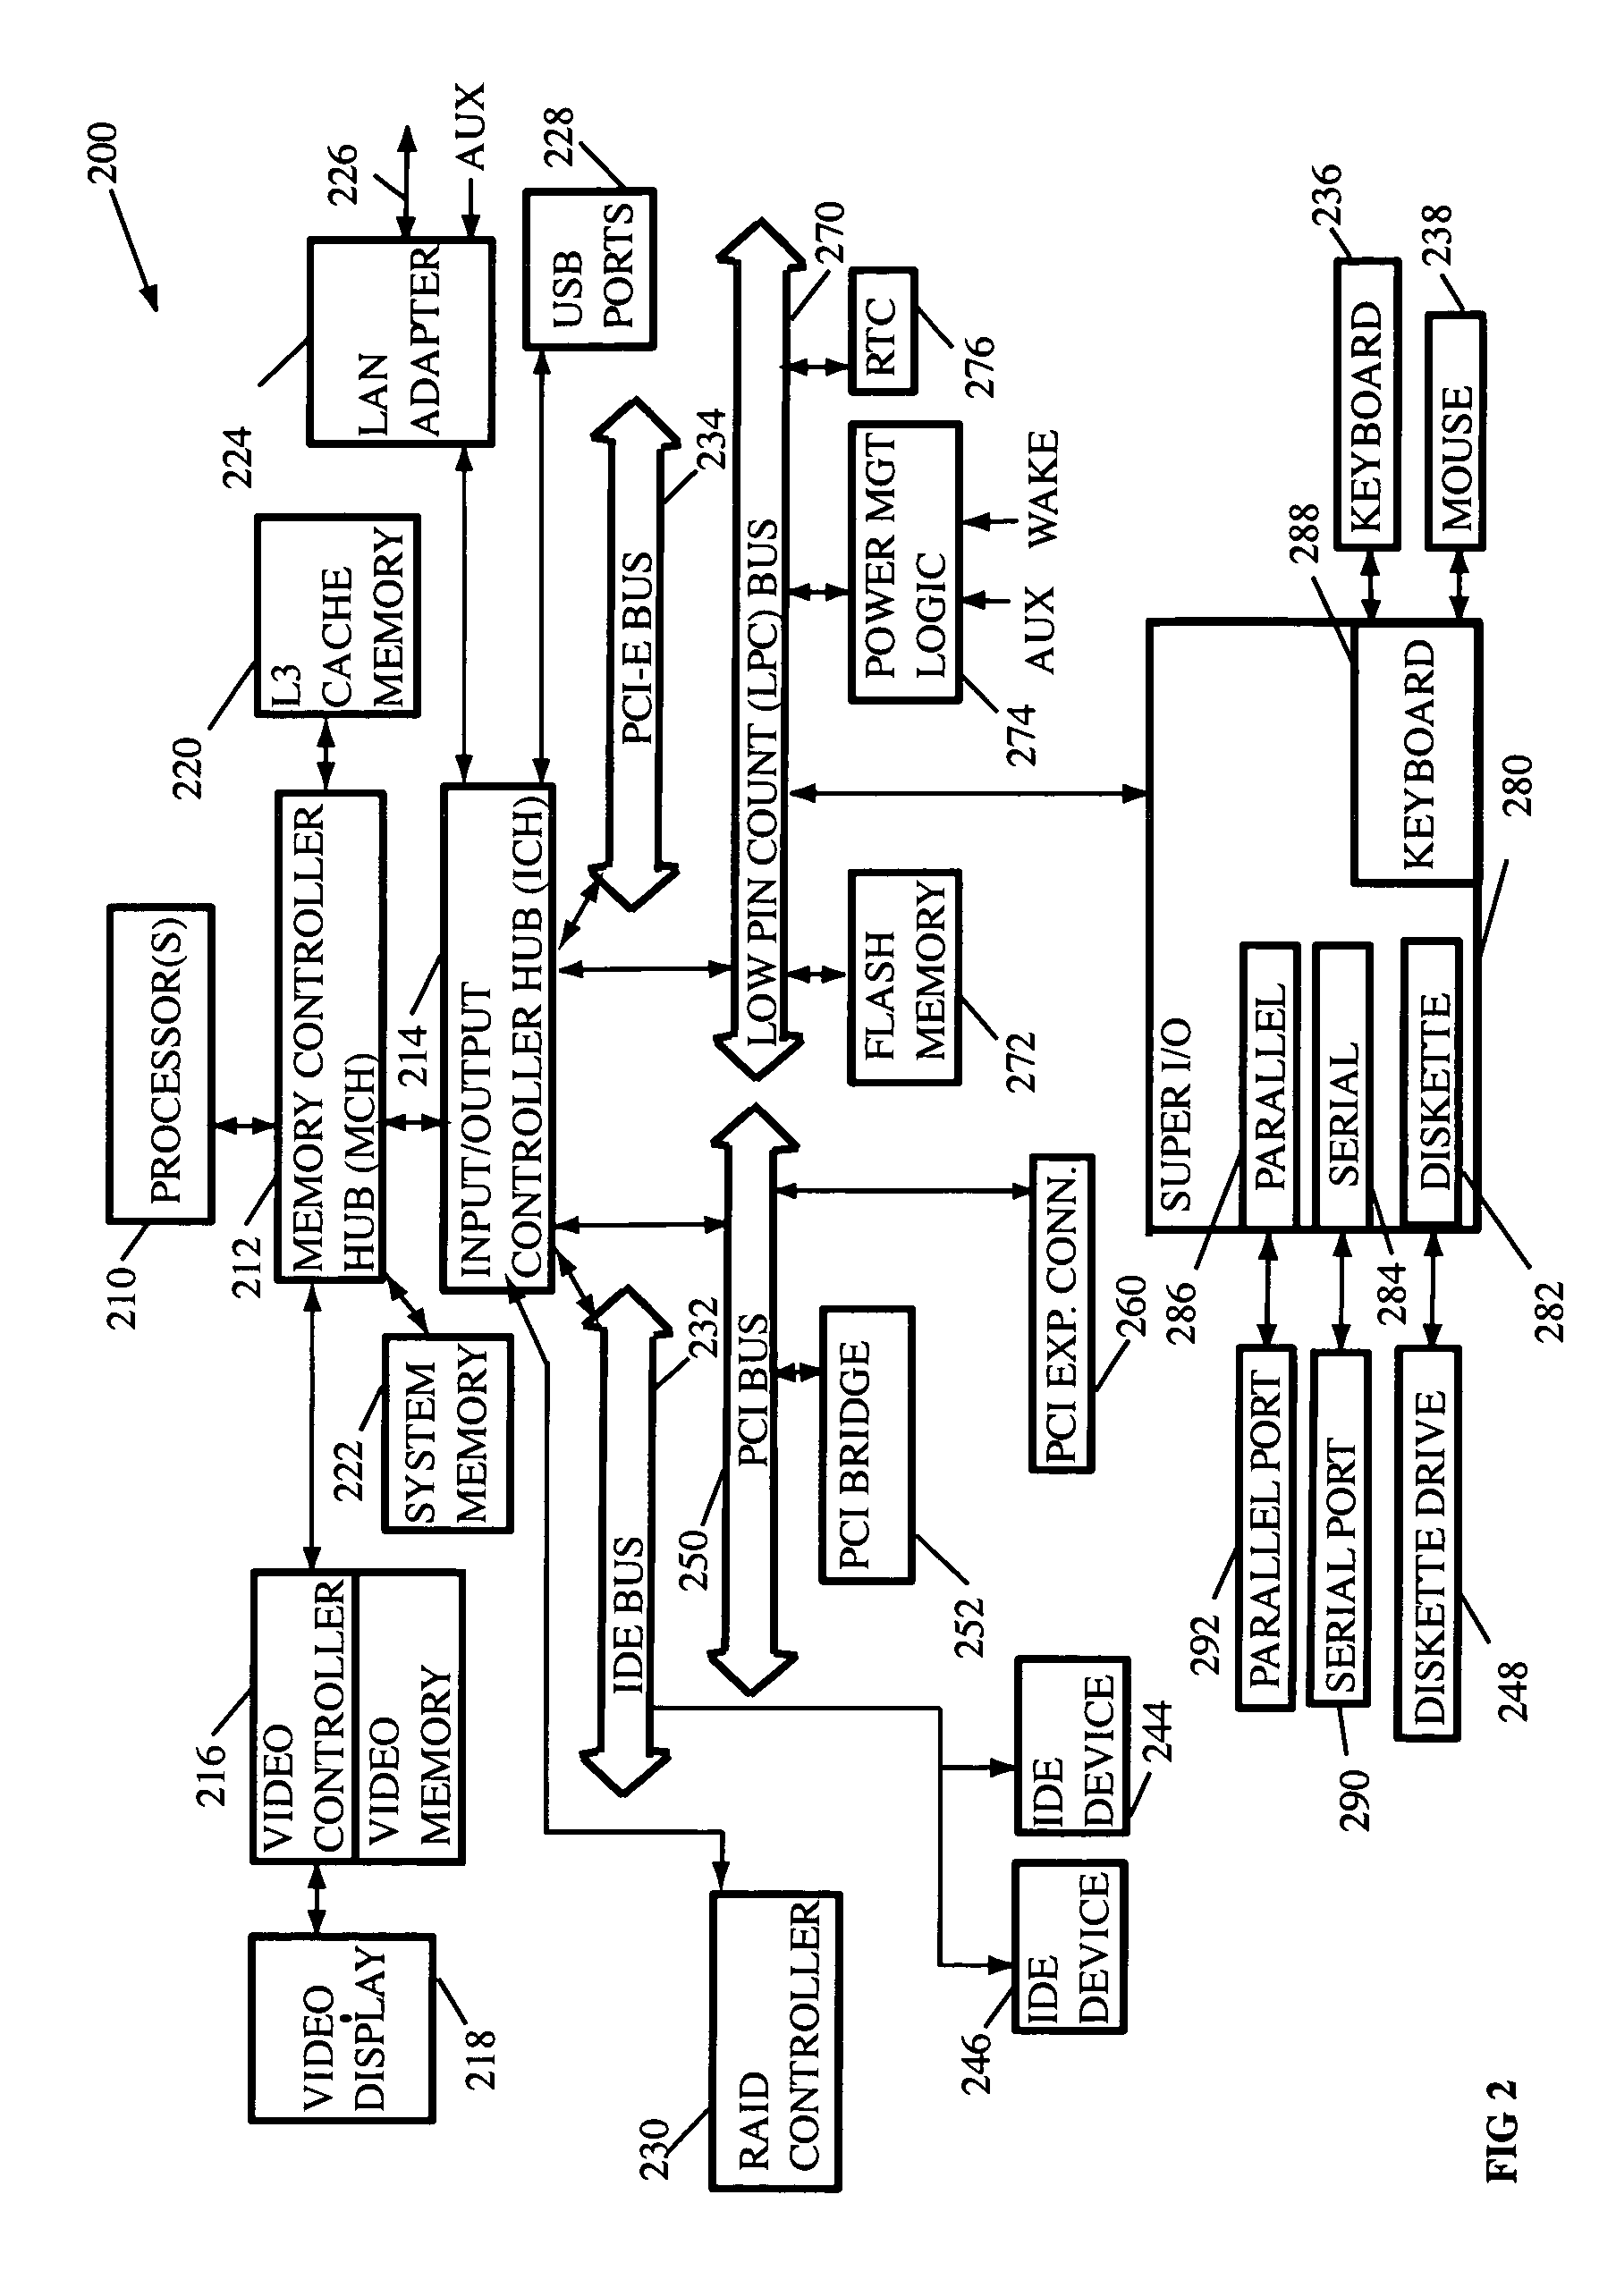 Systems, apparatus and method for reducing dust on components in a computer system